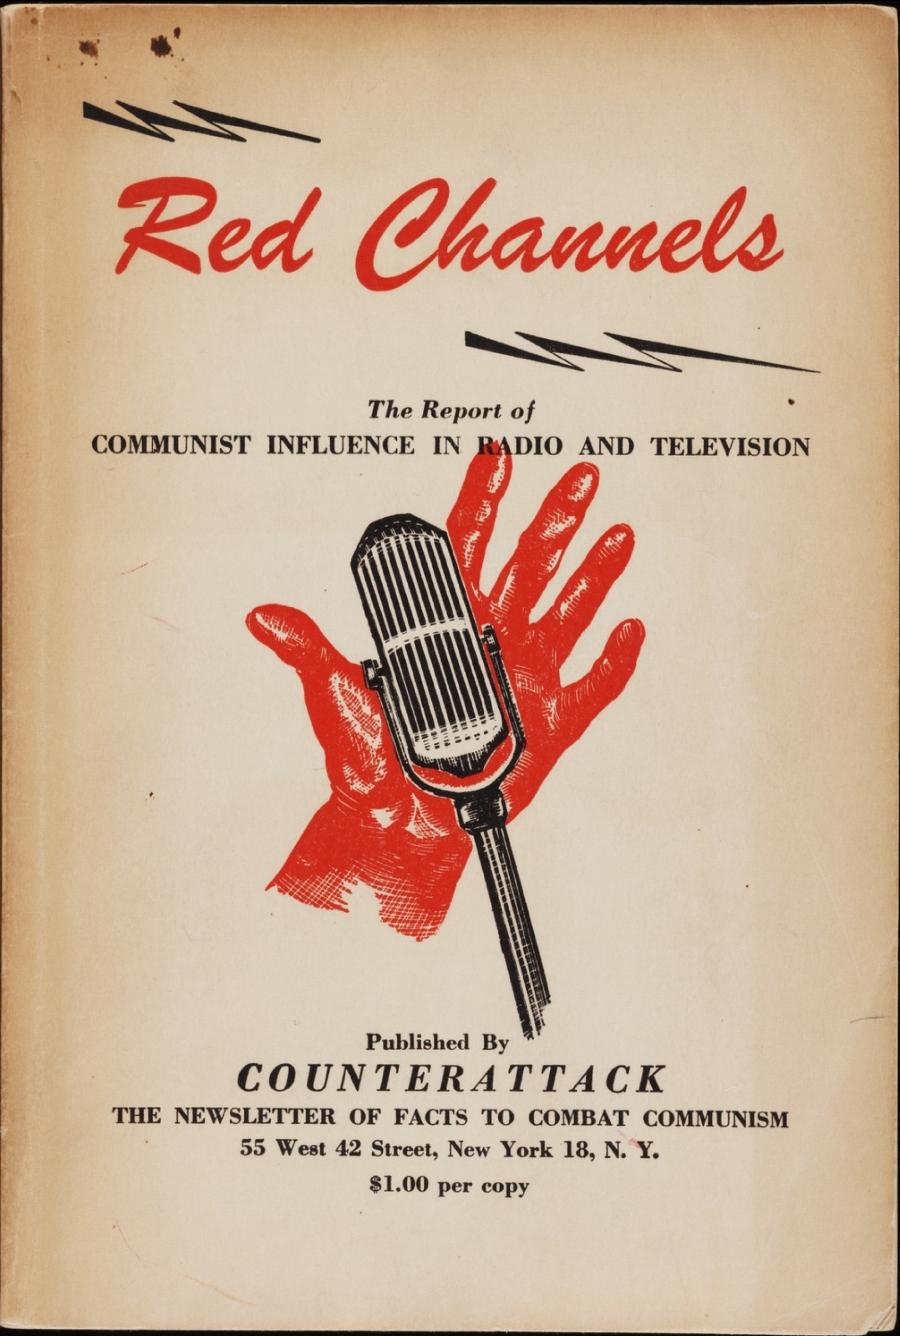 “Red Channels,” published in 1950, was known as the bible of the blacklist.